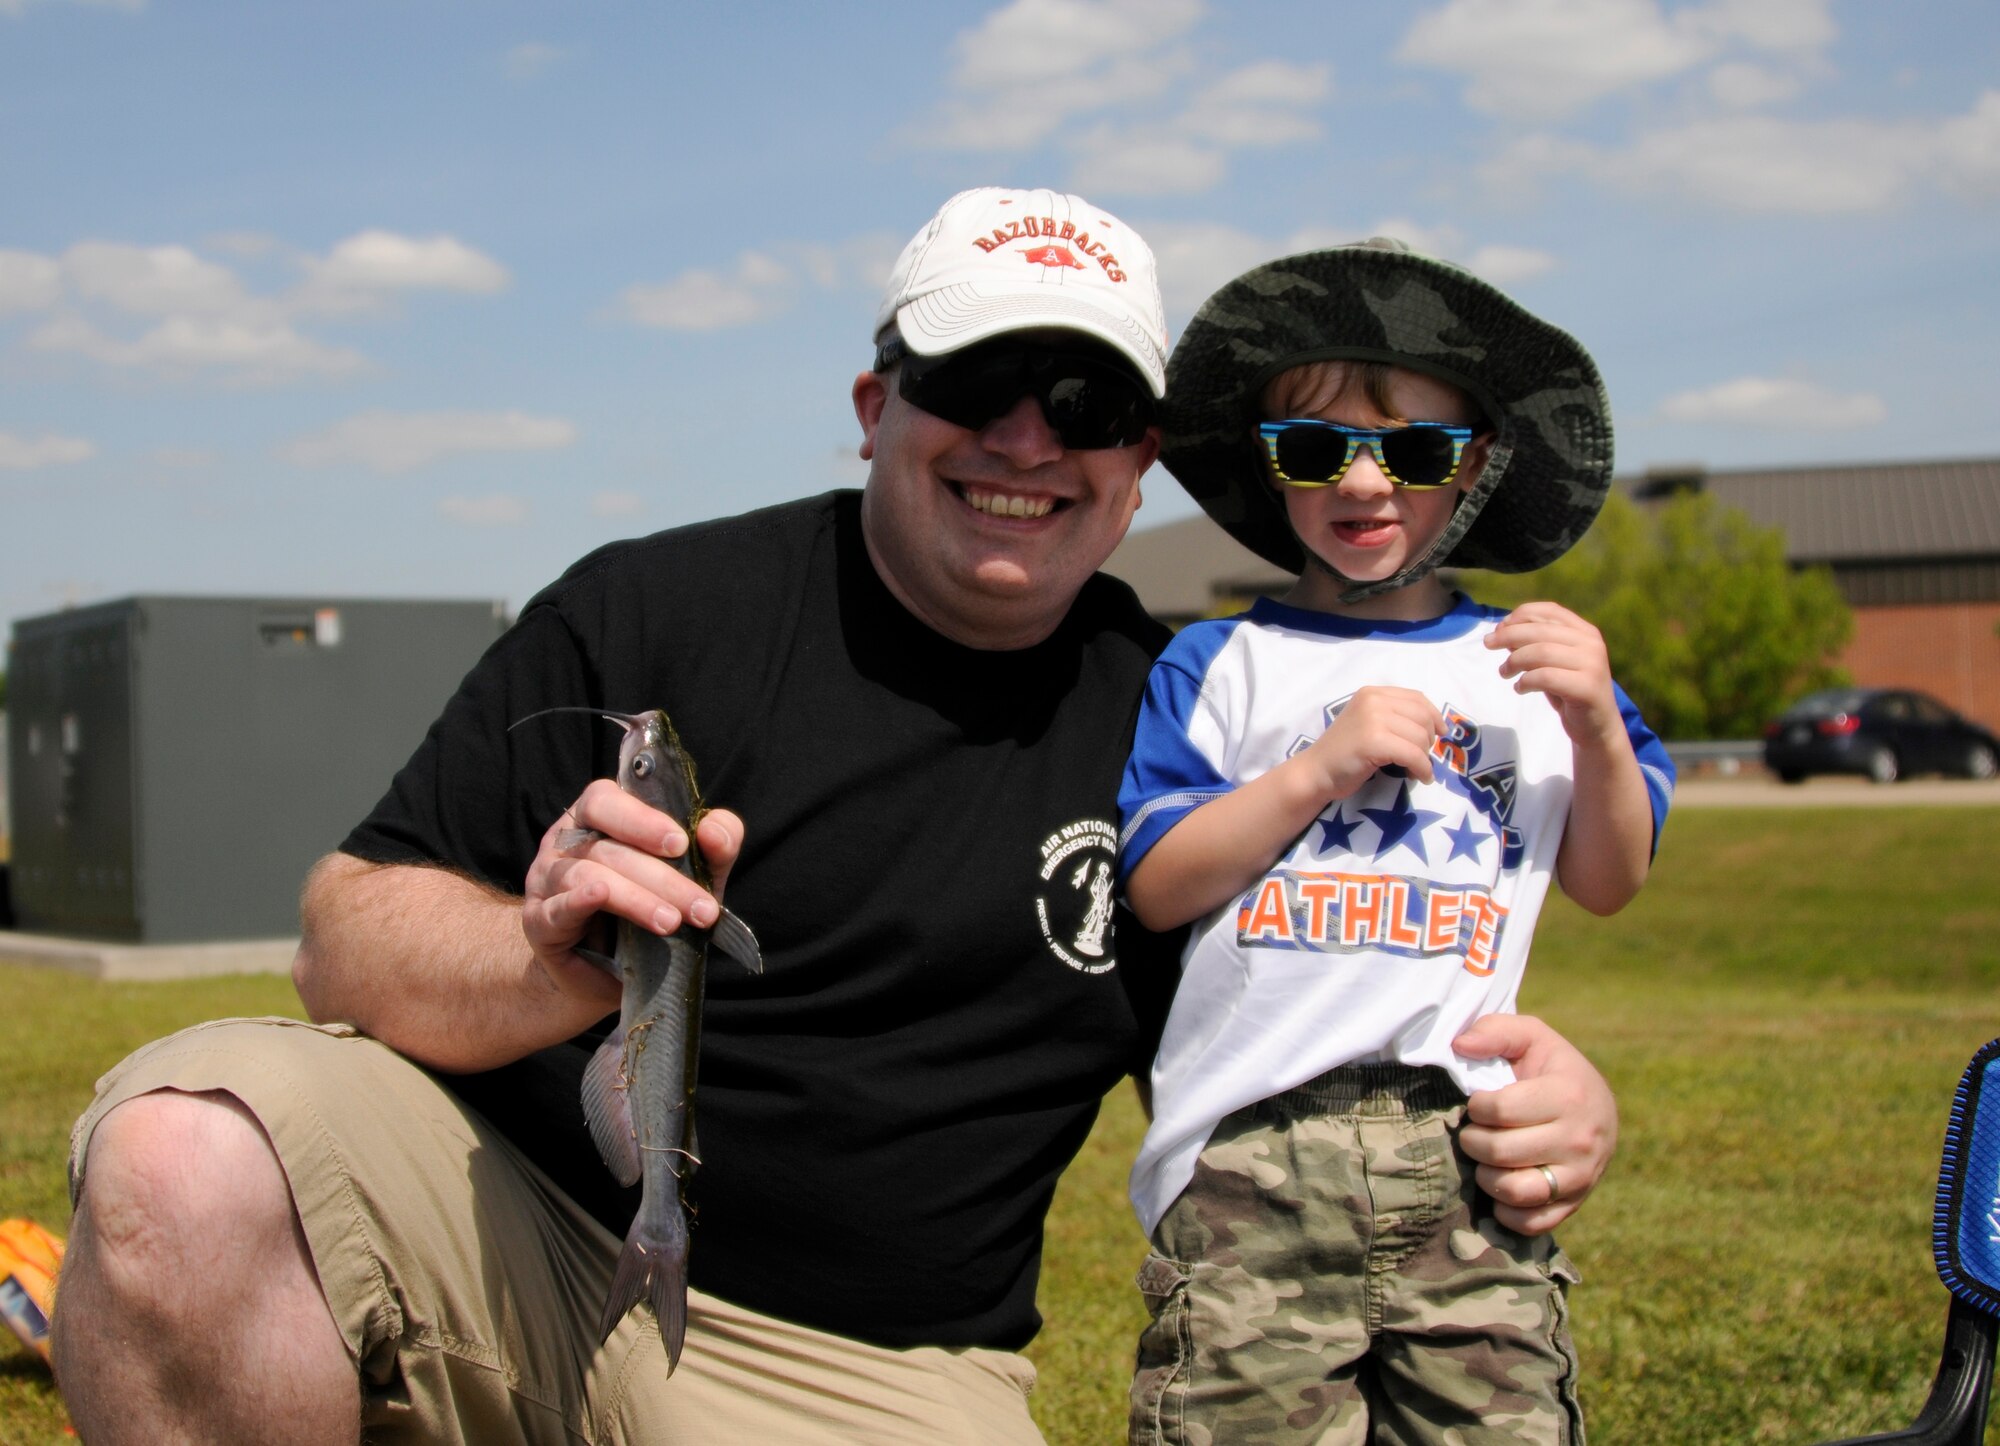 Tech. Sgt. Timothy Booth, 188th Wing bioenvironmental engineer technician, holds up the fish caught by Jesse Booth during the Family Day fishing derby held May 2, 2015, at Ebbing Air National Guard Base, Fort Smith, Ark. Booth caught 6 fish for a total weight of 3.09 pounds, which equaled the most in his age group. (U.S. Air National Guard photo by Staff Sgt. Hannah Dickerson/released)